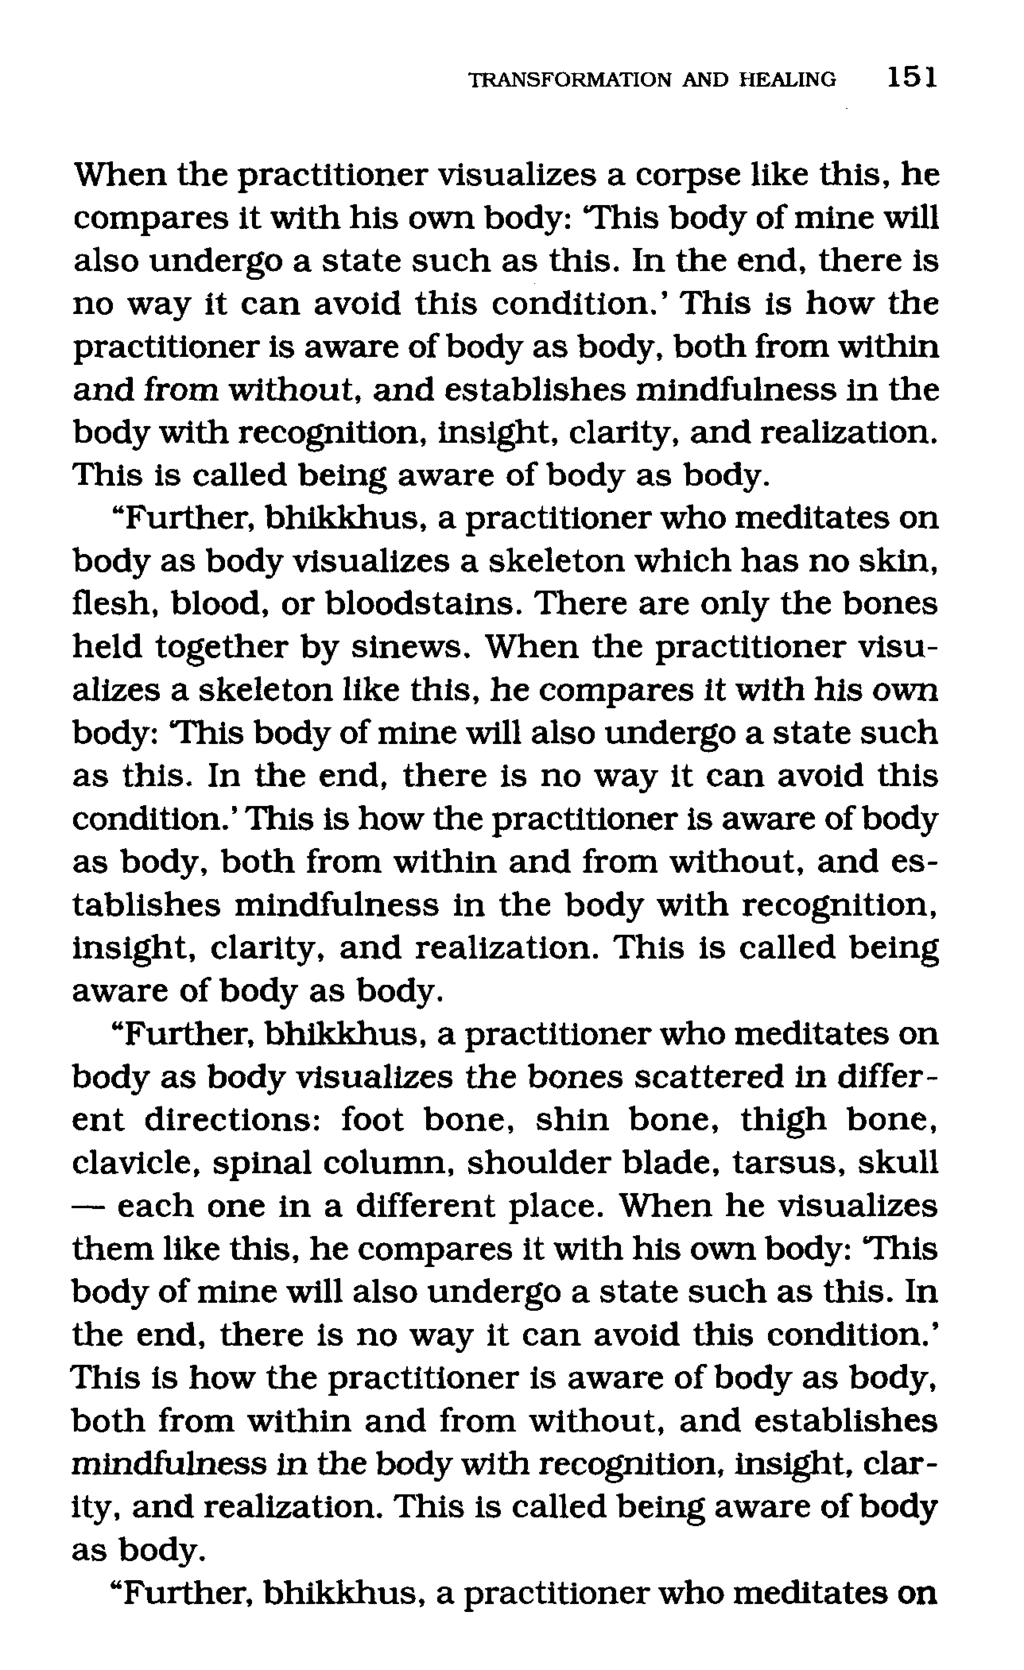 When the practitioner visualizes a corpse like this, he compares it with his own body: 'This body of mine will also undergo a state such as this.